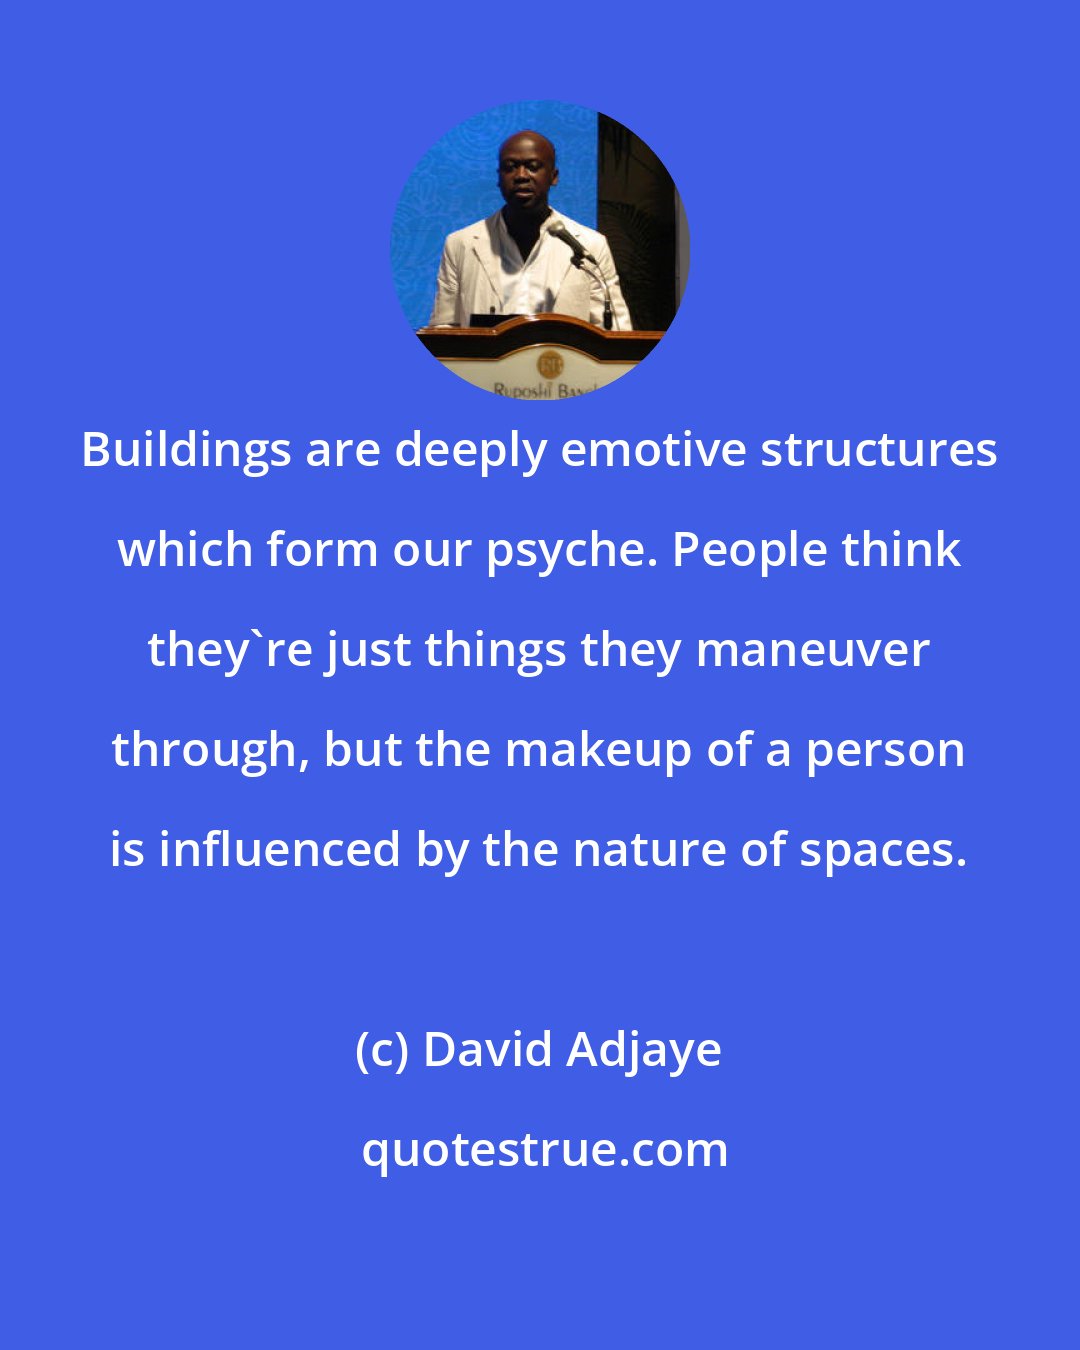 David Adjaye: Buildings are deeply emotive structures which form our psyche. People think they're just things they maneuver through, but the makeup of a person is influenced by the nature of spaces.